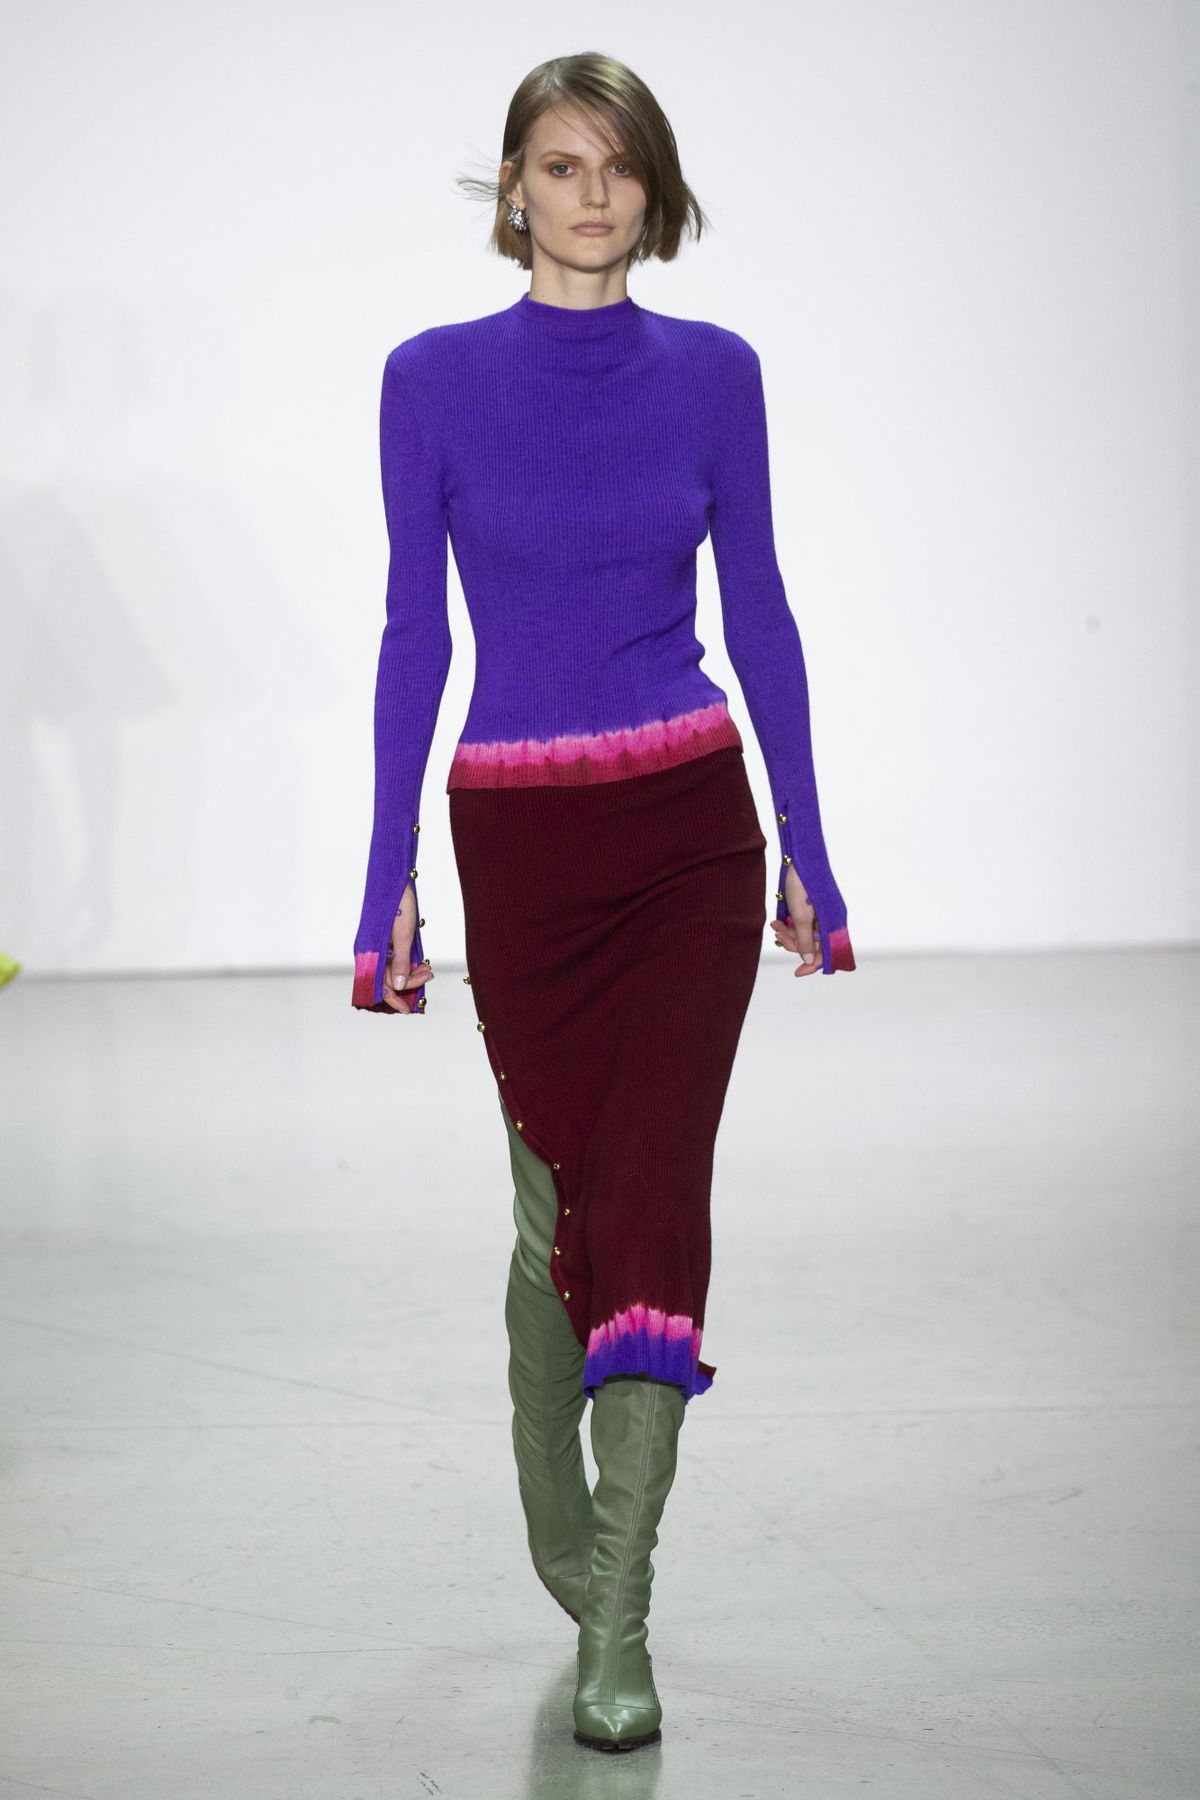 FUTURE OF FASHION: Every Shade of Purple Is Trending for Fall 2022